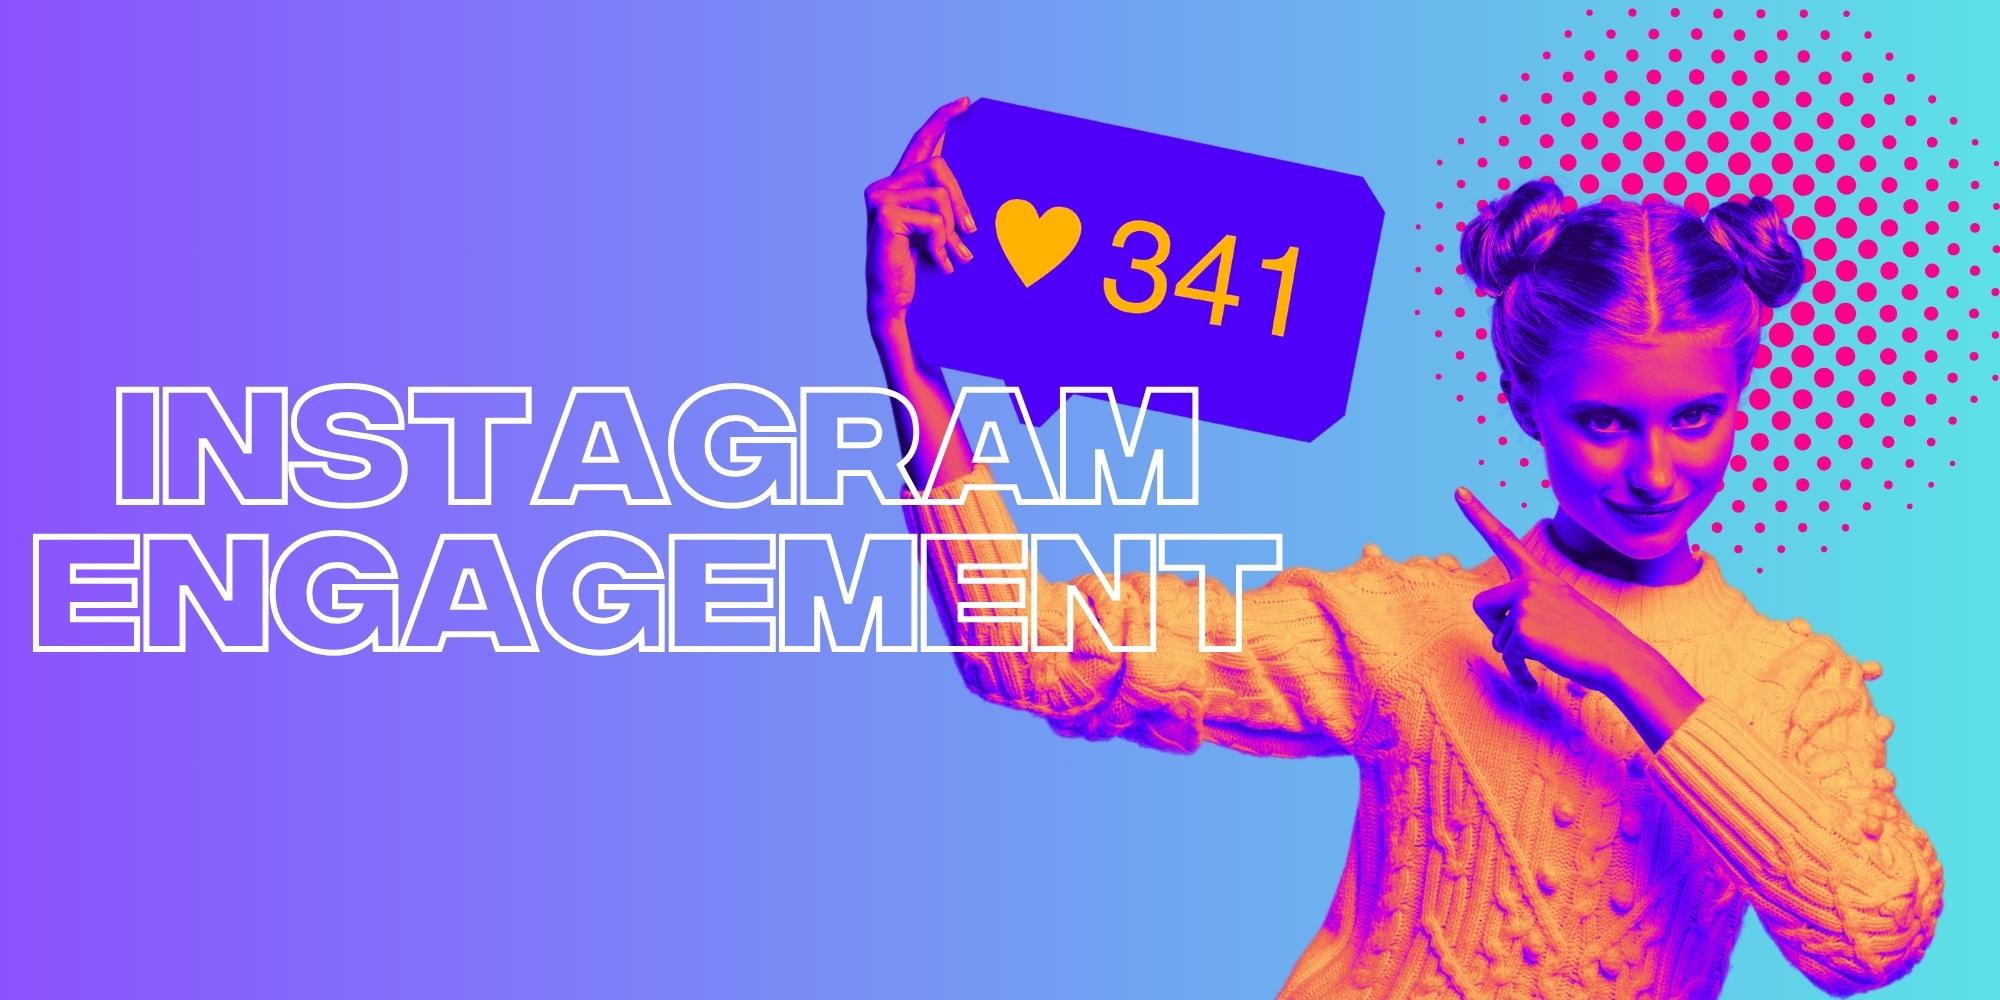 Here’s What Your Competitors Do To Organically Increase Instagram Engagement